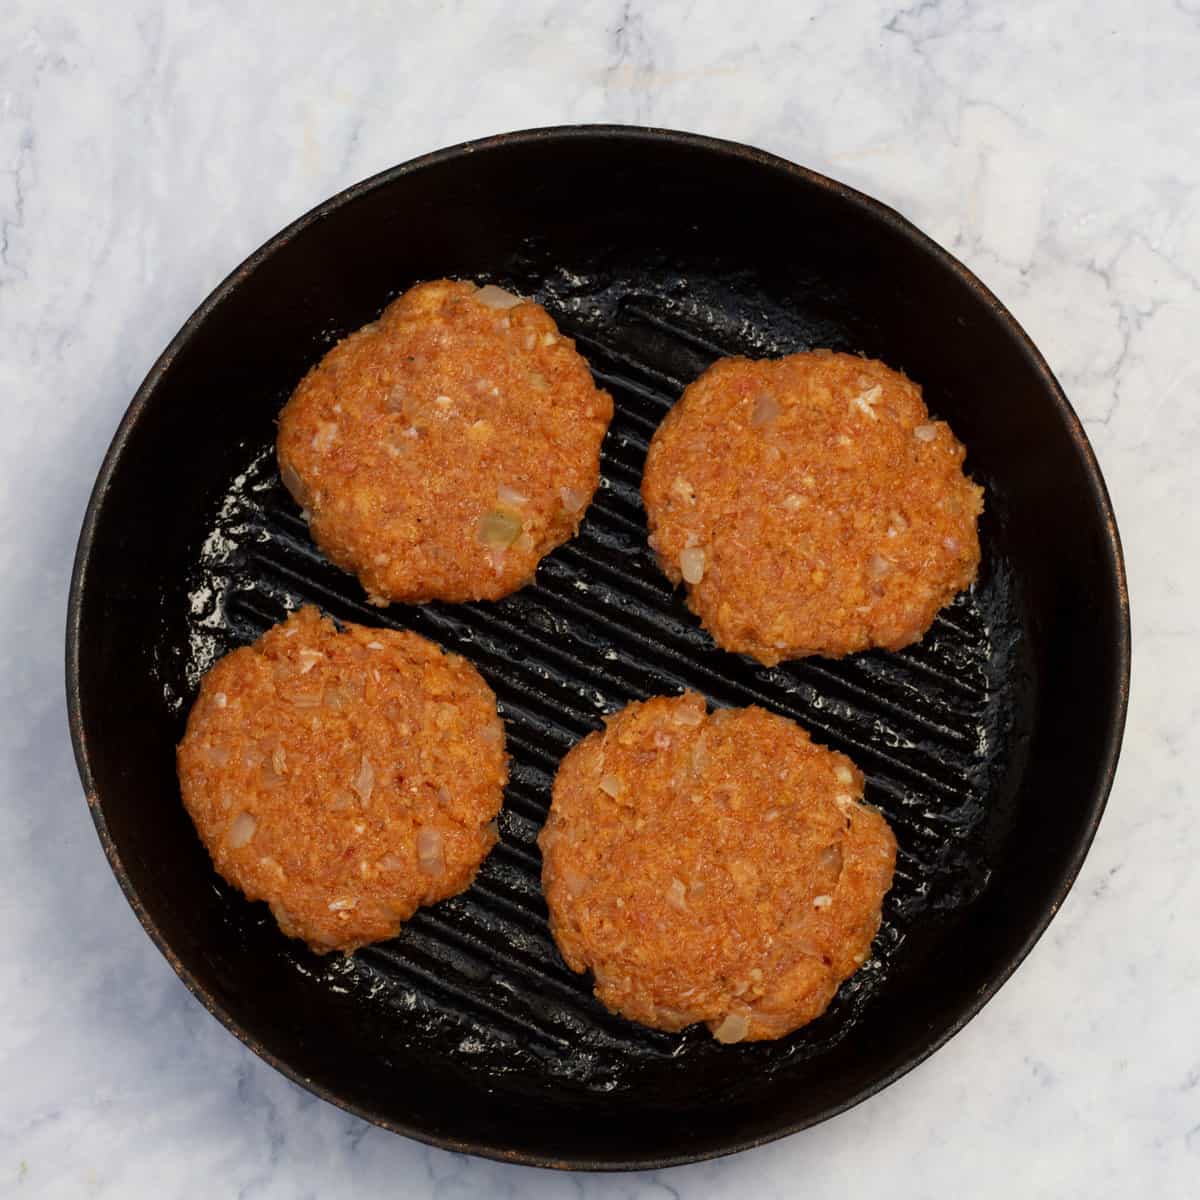 Raw chicken burger patties cooking in a hot skillet.